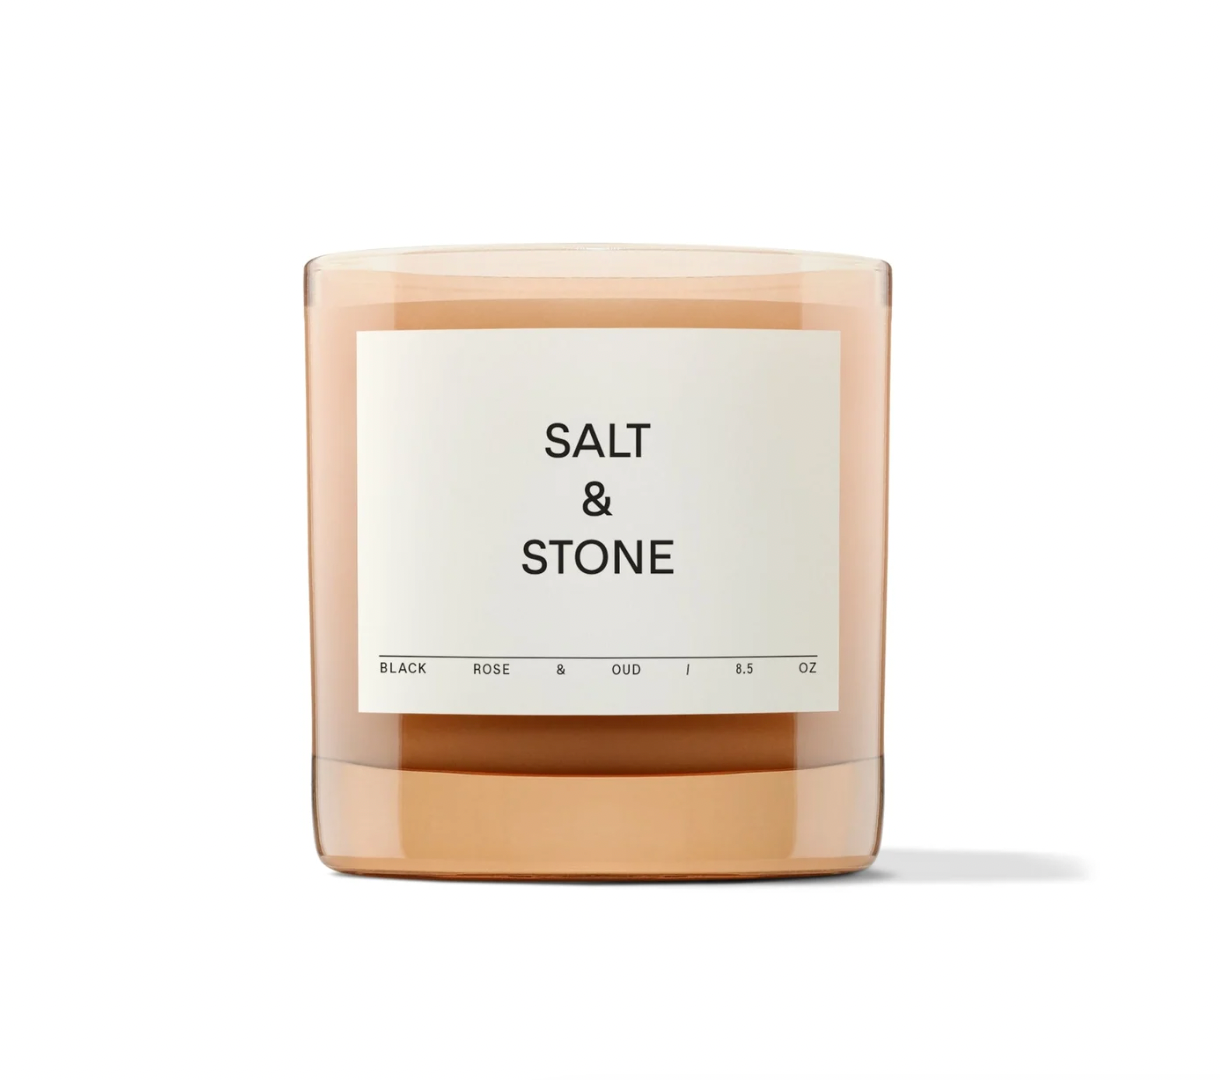 Salt and Stone candle- Black rose & Oud